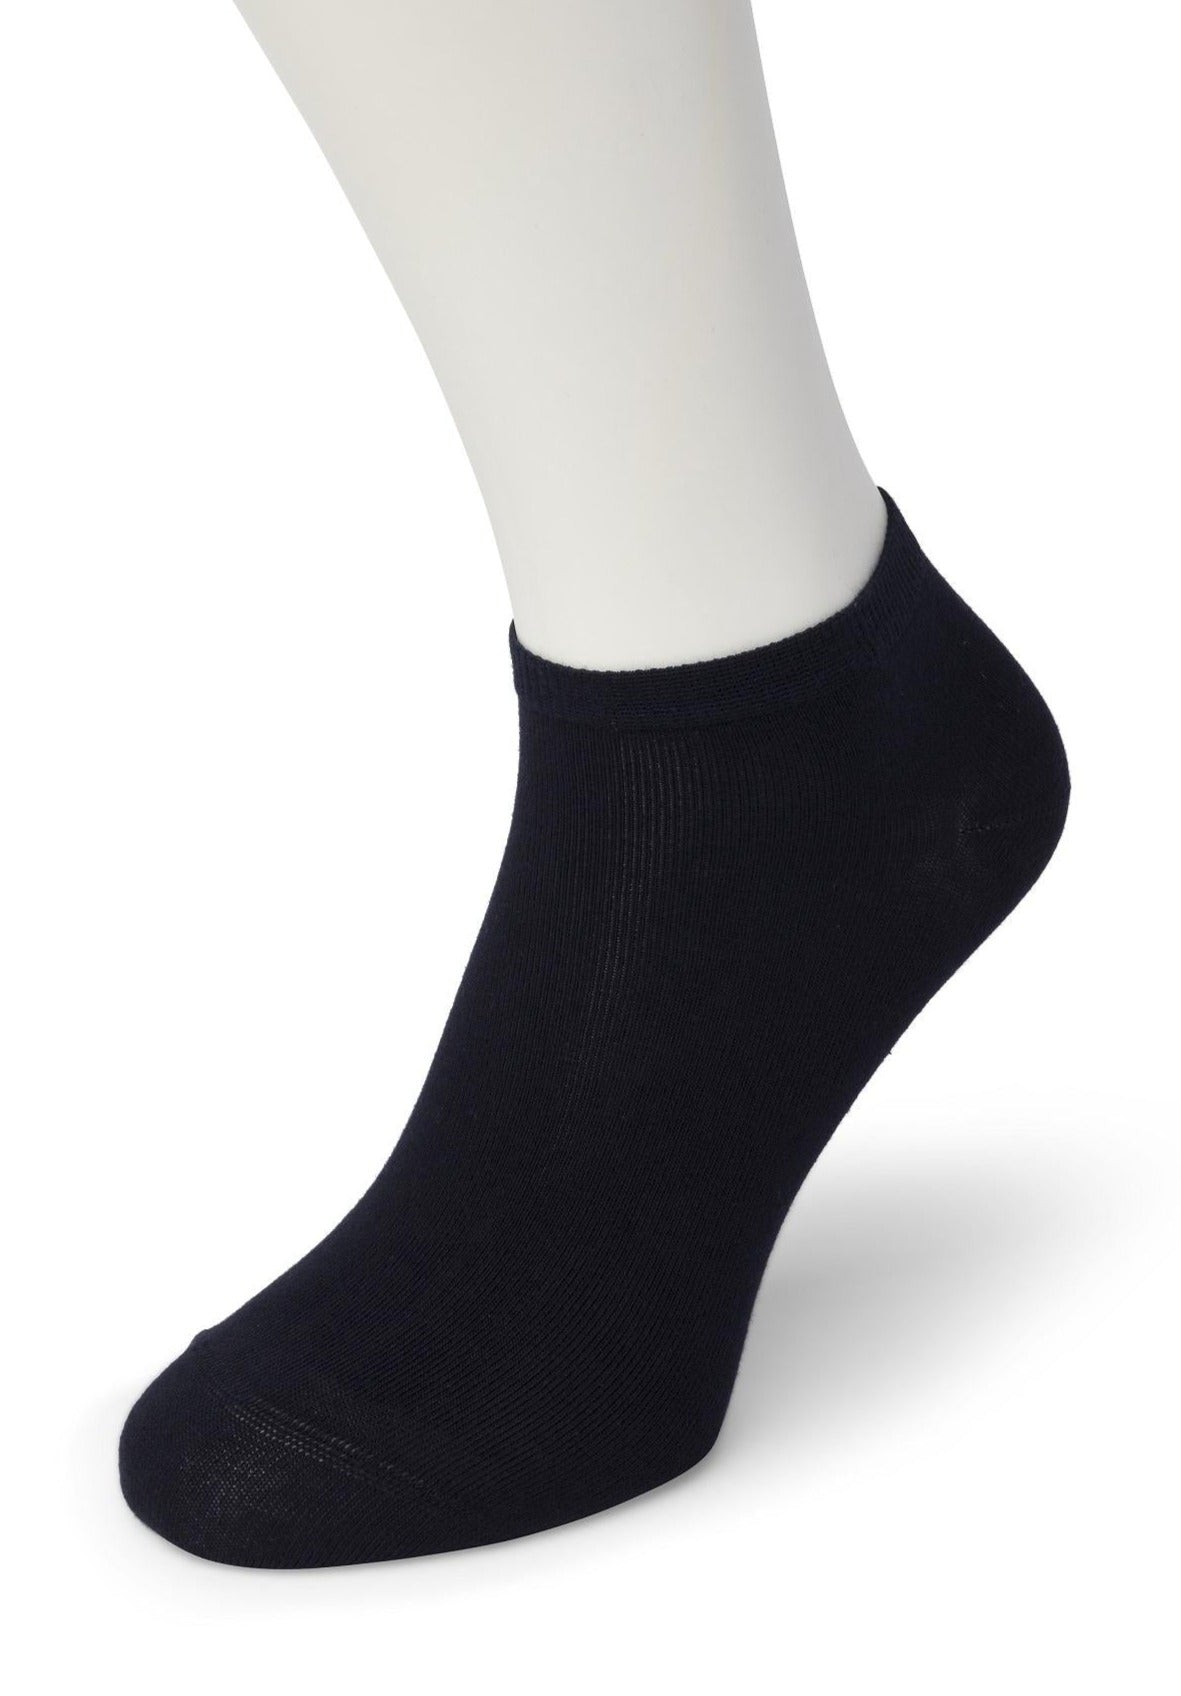 Bonnie Doon BD811001/BE812001/BD913401 Cotton Short Ankle Sock - Navy Low rise cotton mix socks with flat toe seam and plain elasticated cuff. 